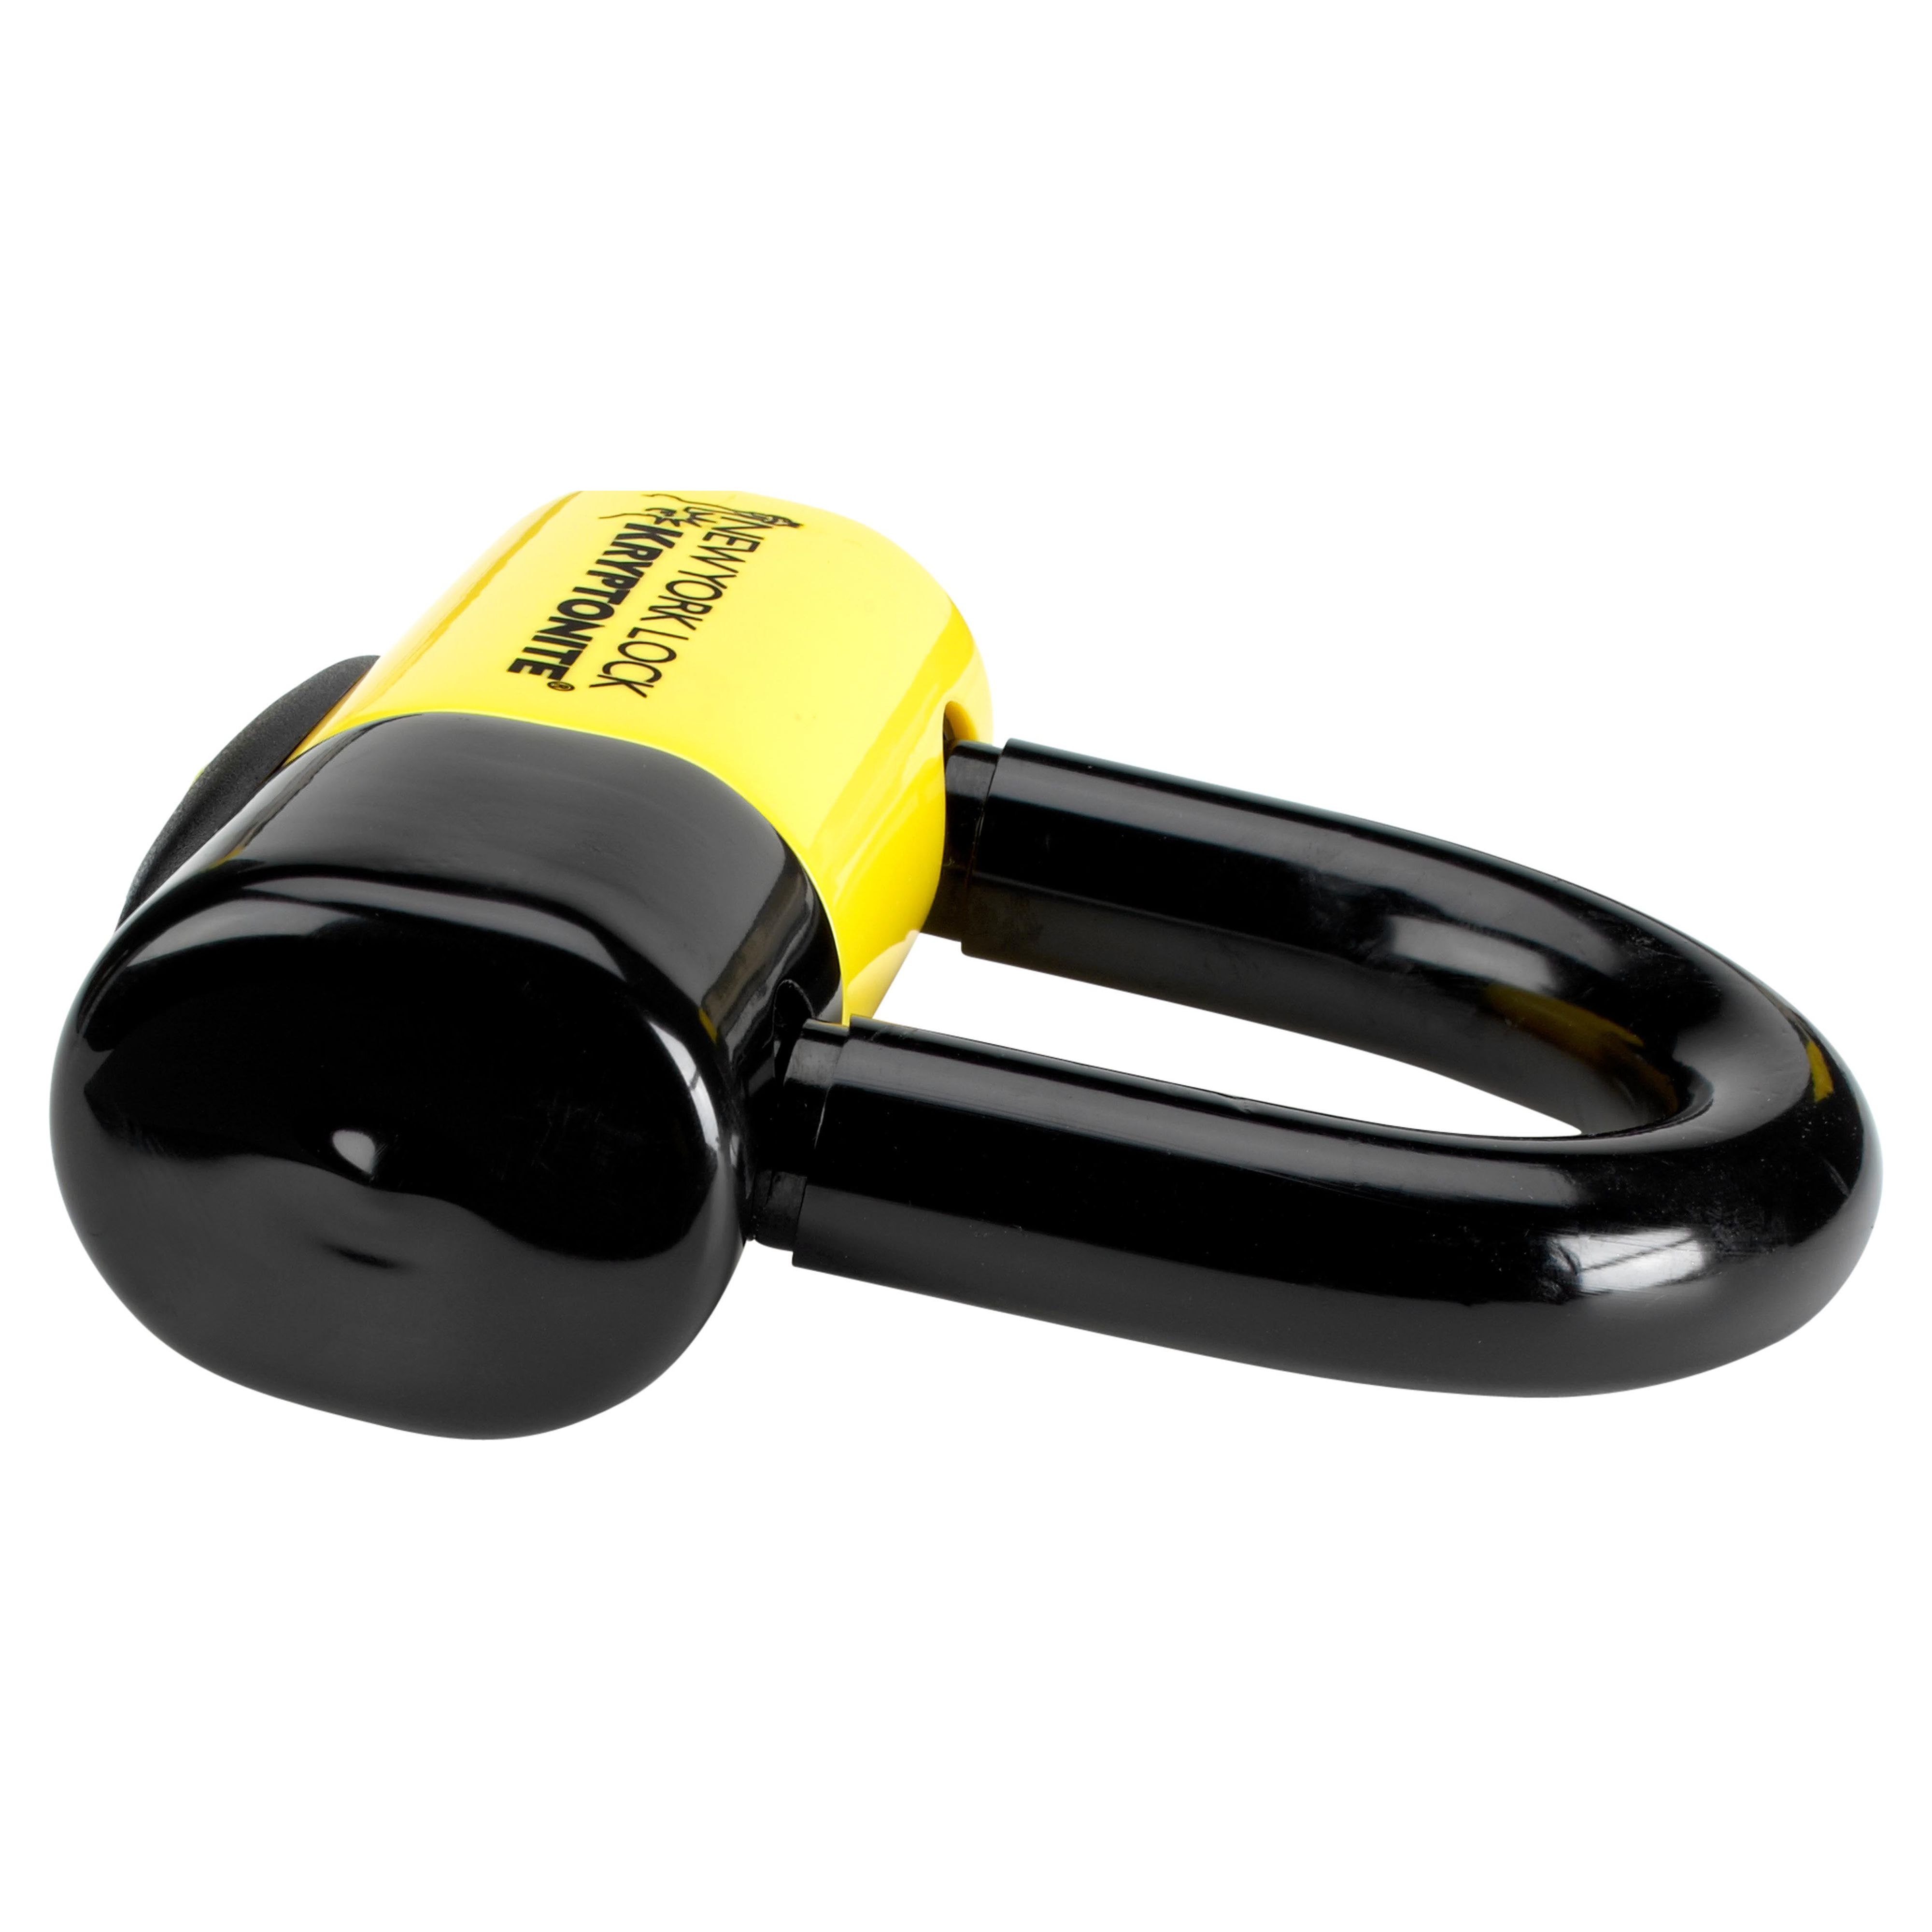 Kryptonite New York Fahgettaboudit Chain 1415 and New York Disc Bicycle Locks, 14 mm X 60 In. - image 3 of 7